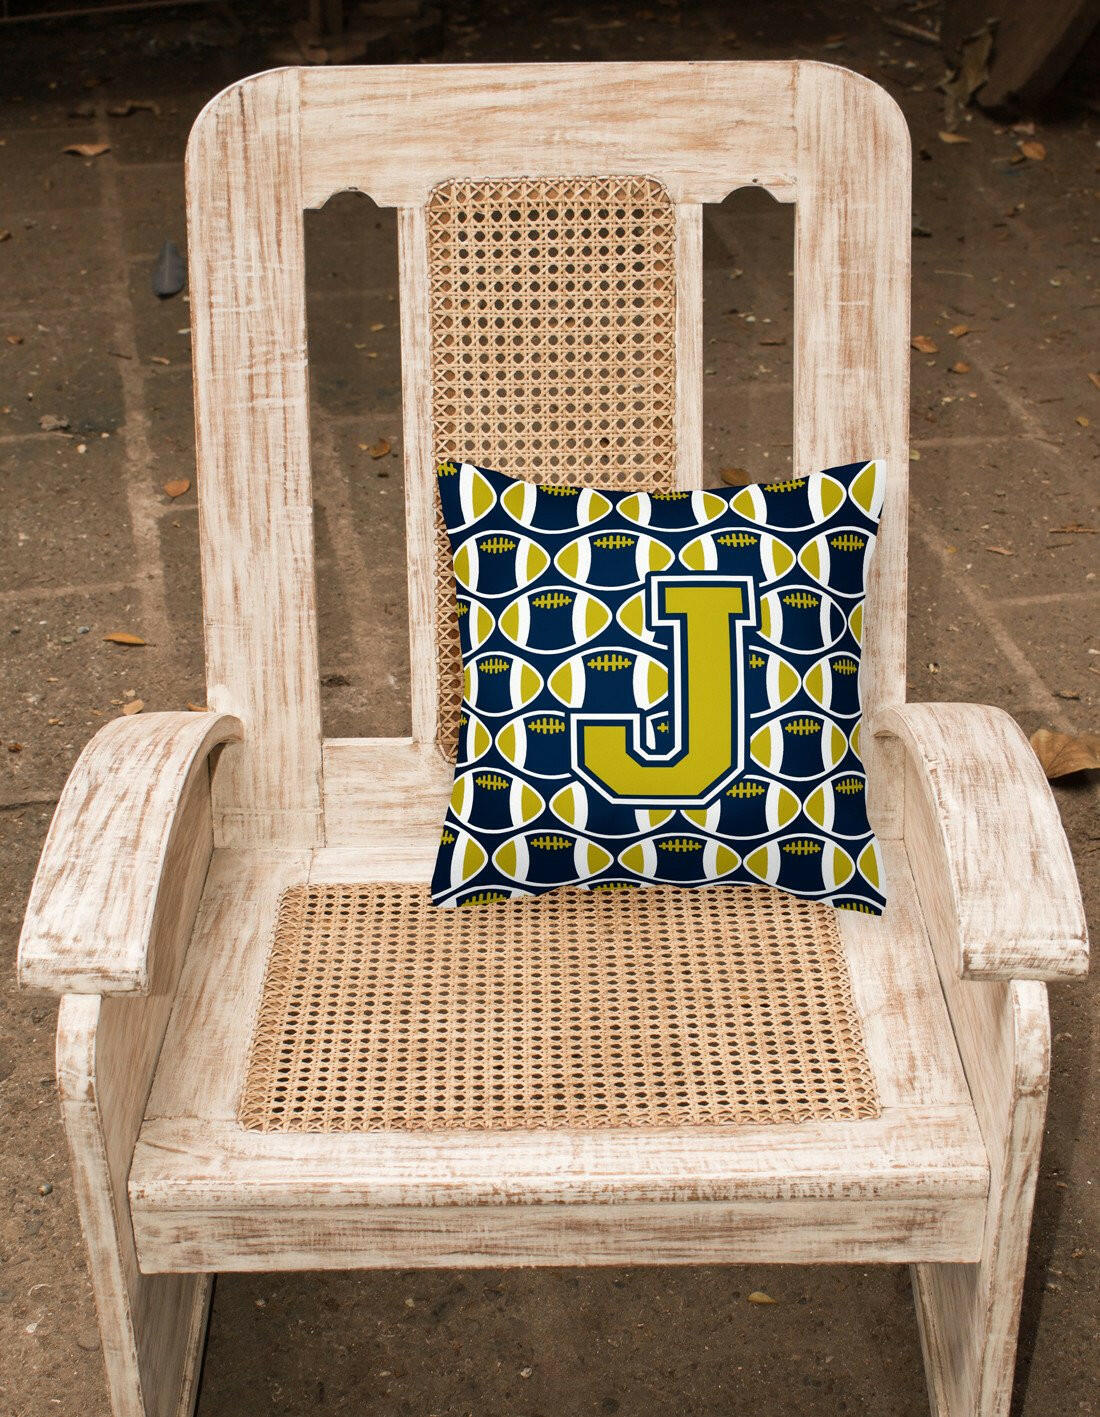 Letter J Football Blue and Gold Fabric Decorative Pillow CJ1074-JPW1414 by Caroline's Treasures